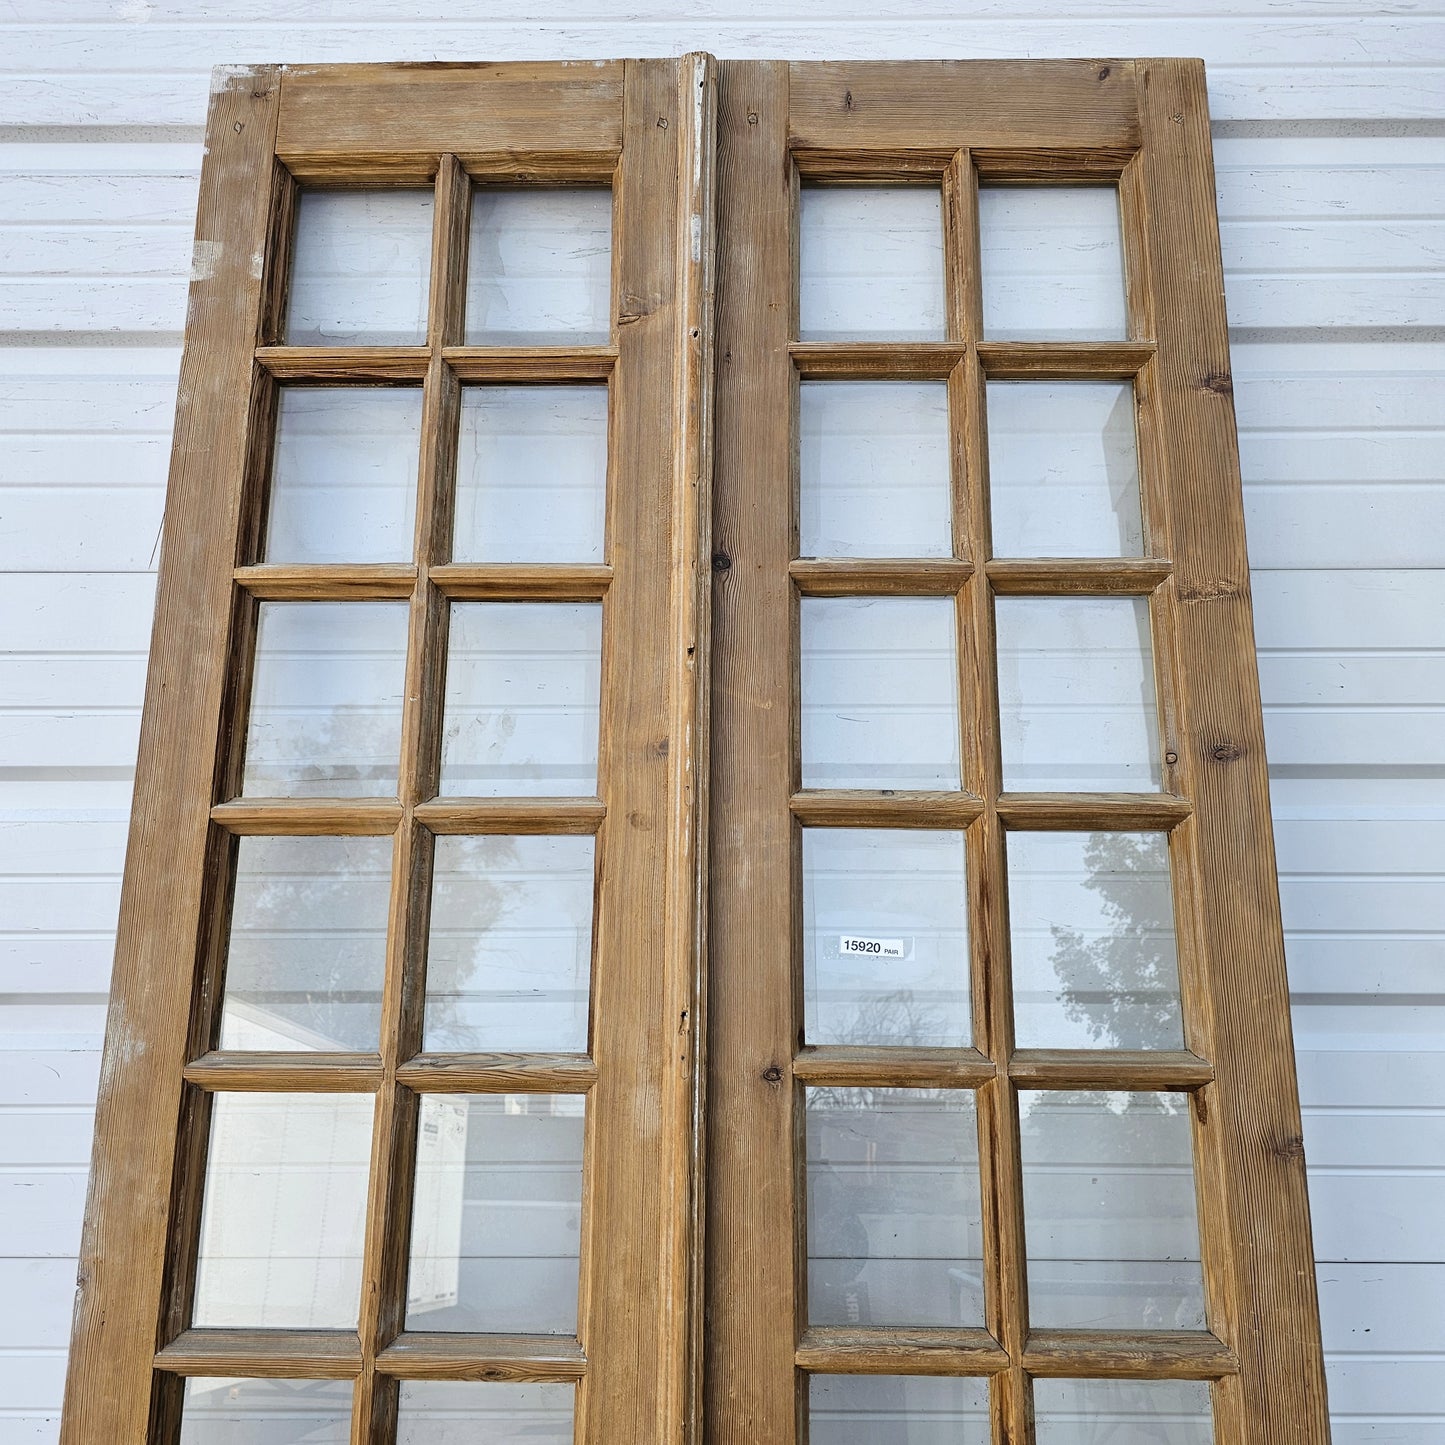 Pair of Wood French Doors w/28 Glass Lites